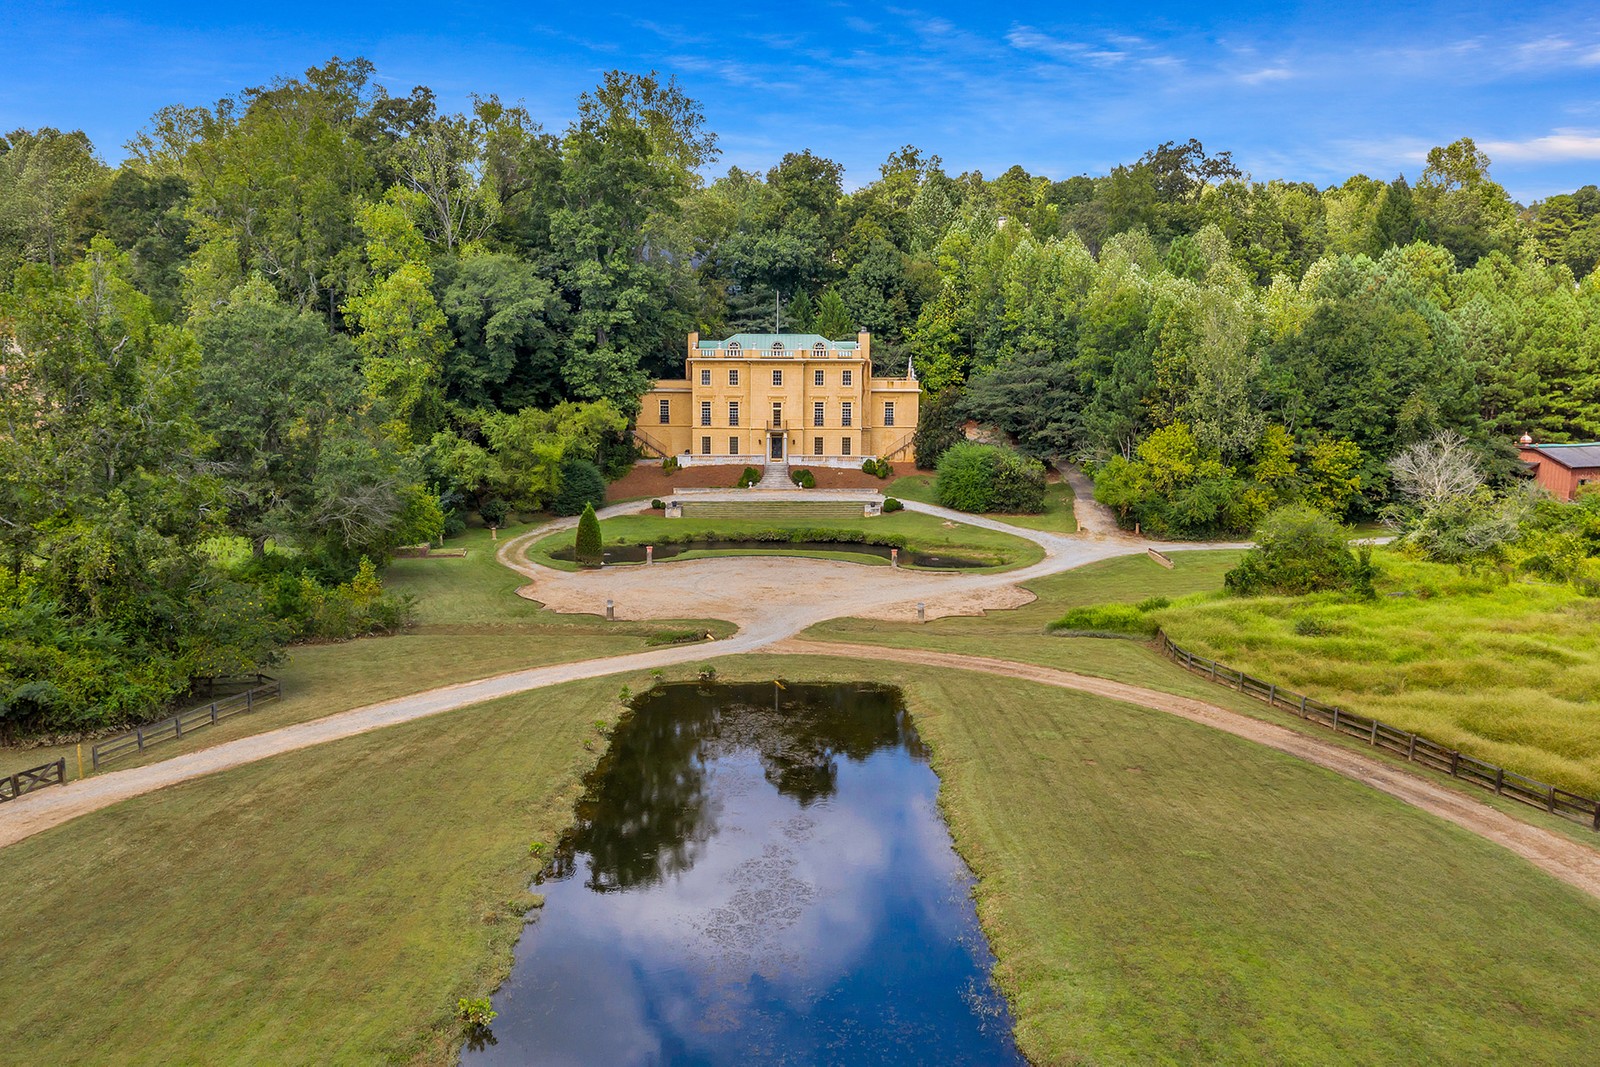 A yellow European-style mansion set atop a hill overlooking a pond with green grass all around. 